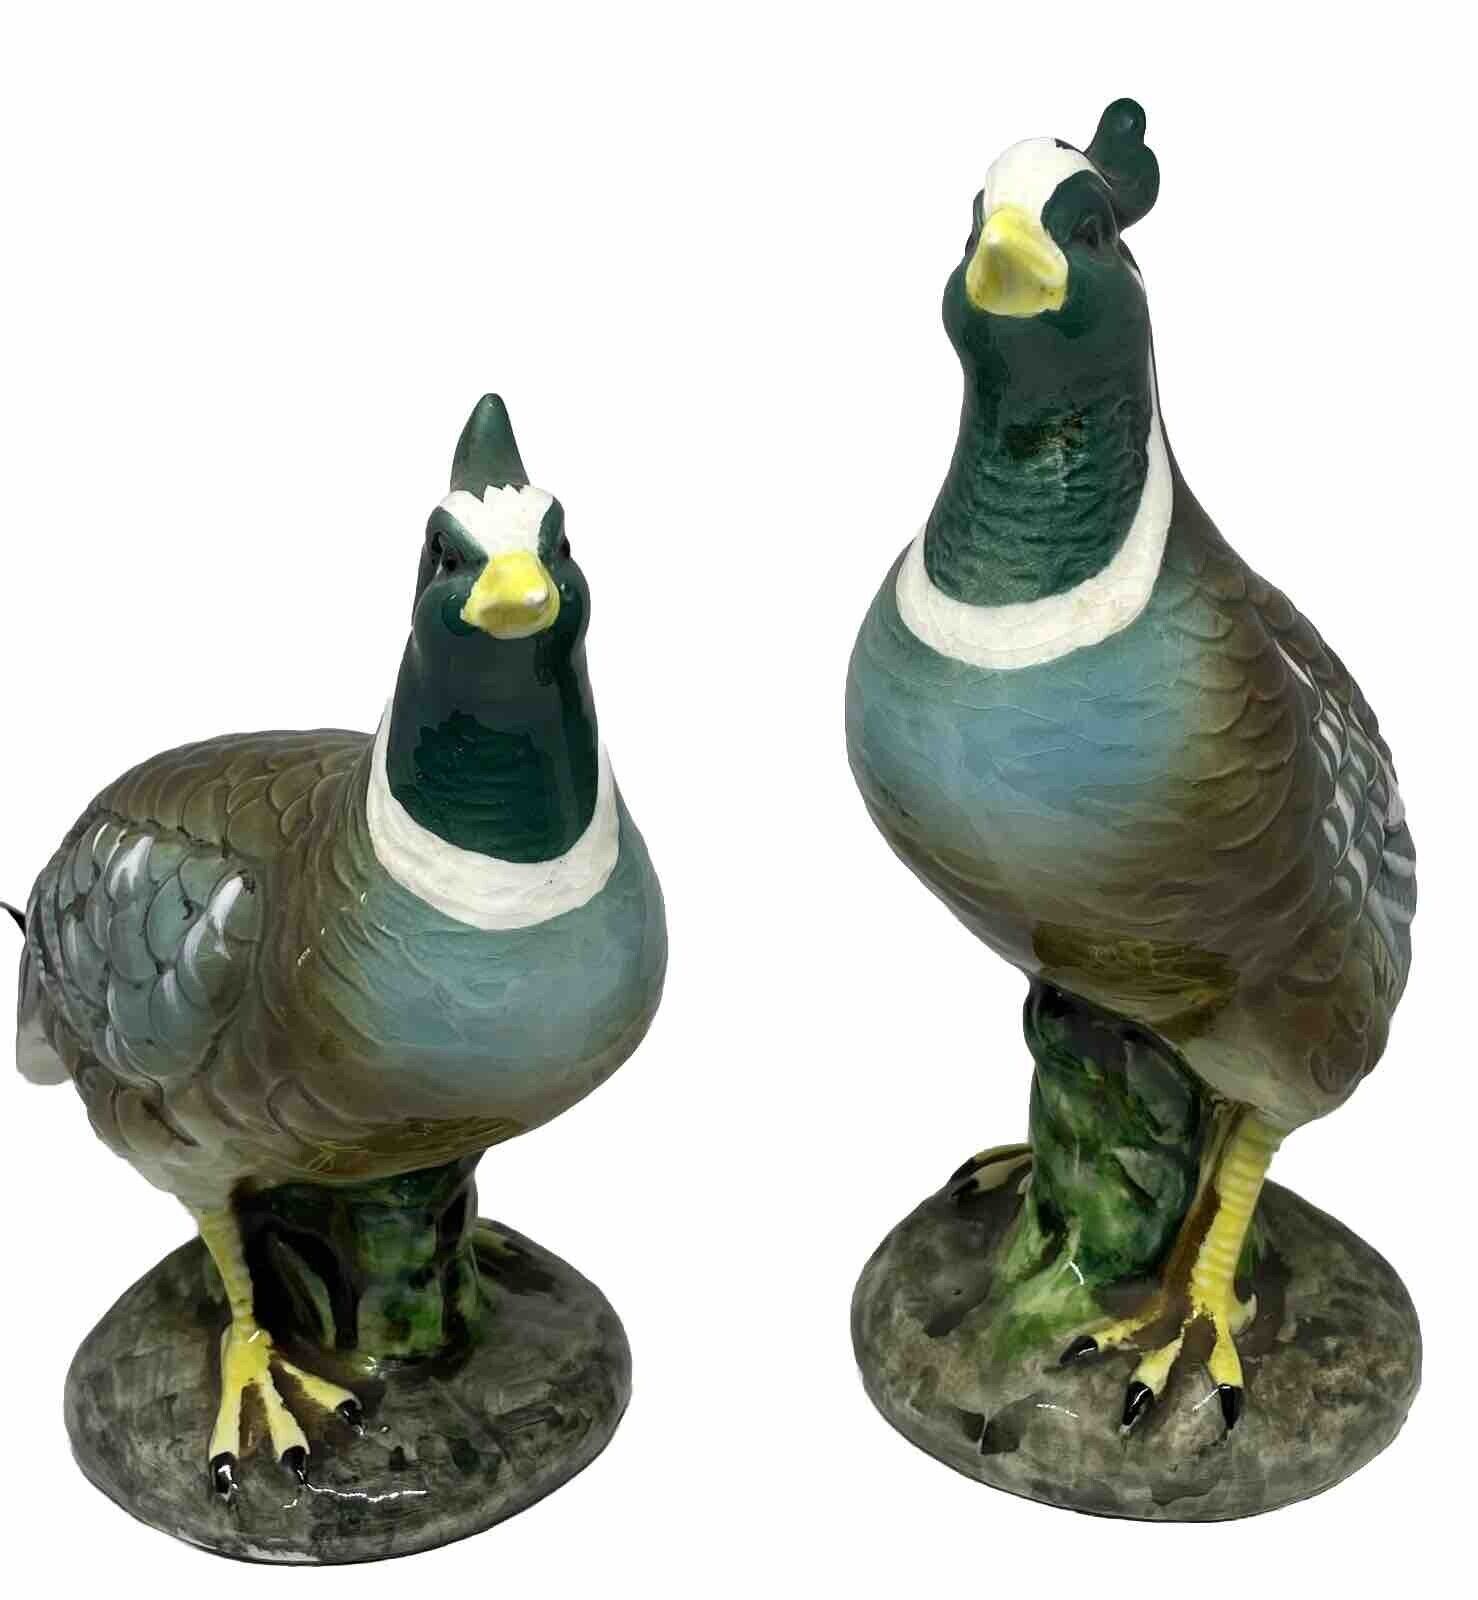 VINTAGE JAPAN ISCO PAIR OF QUAIL PORCELAIN FIGURINES TEAL/GREEN/GRAY